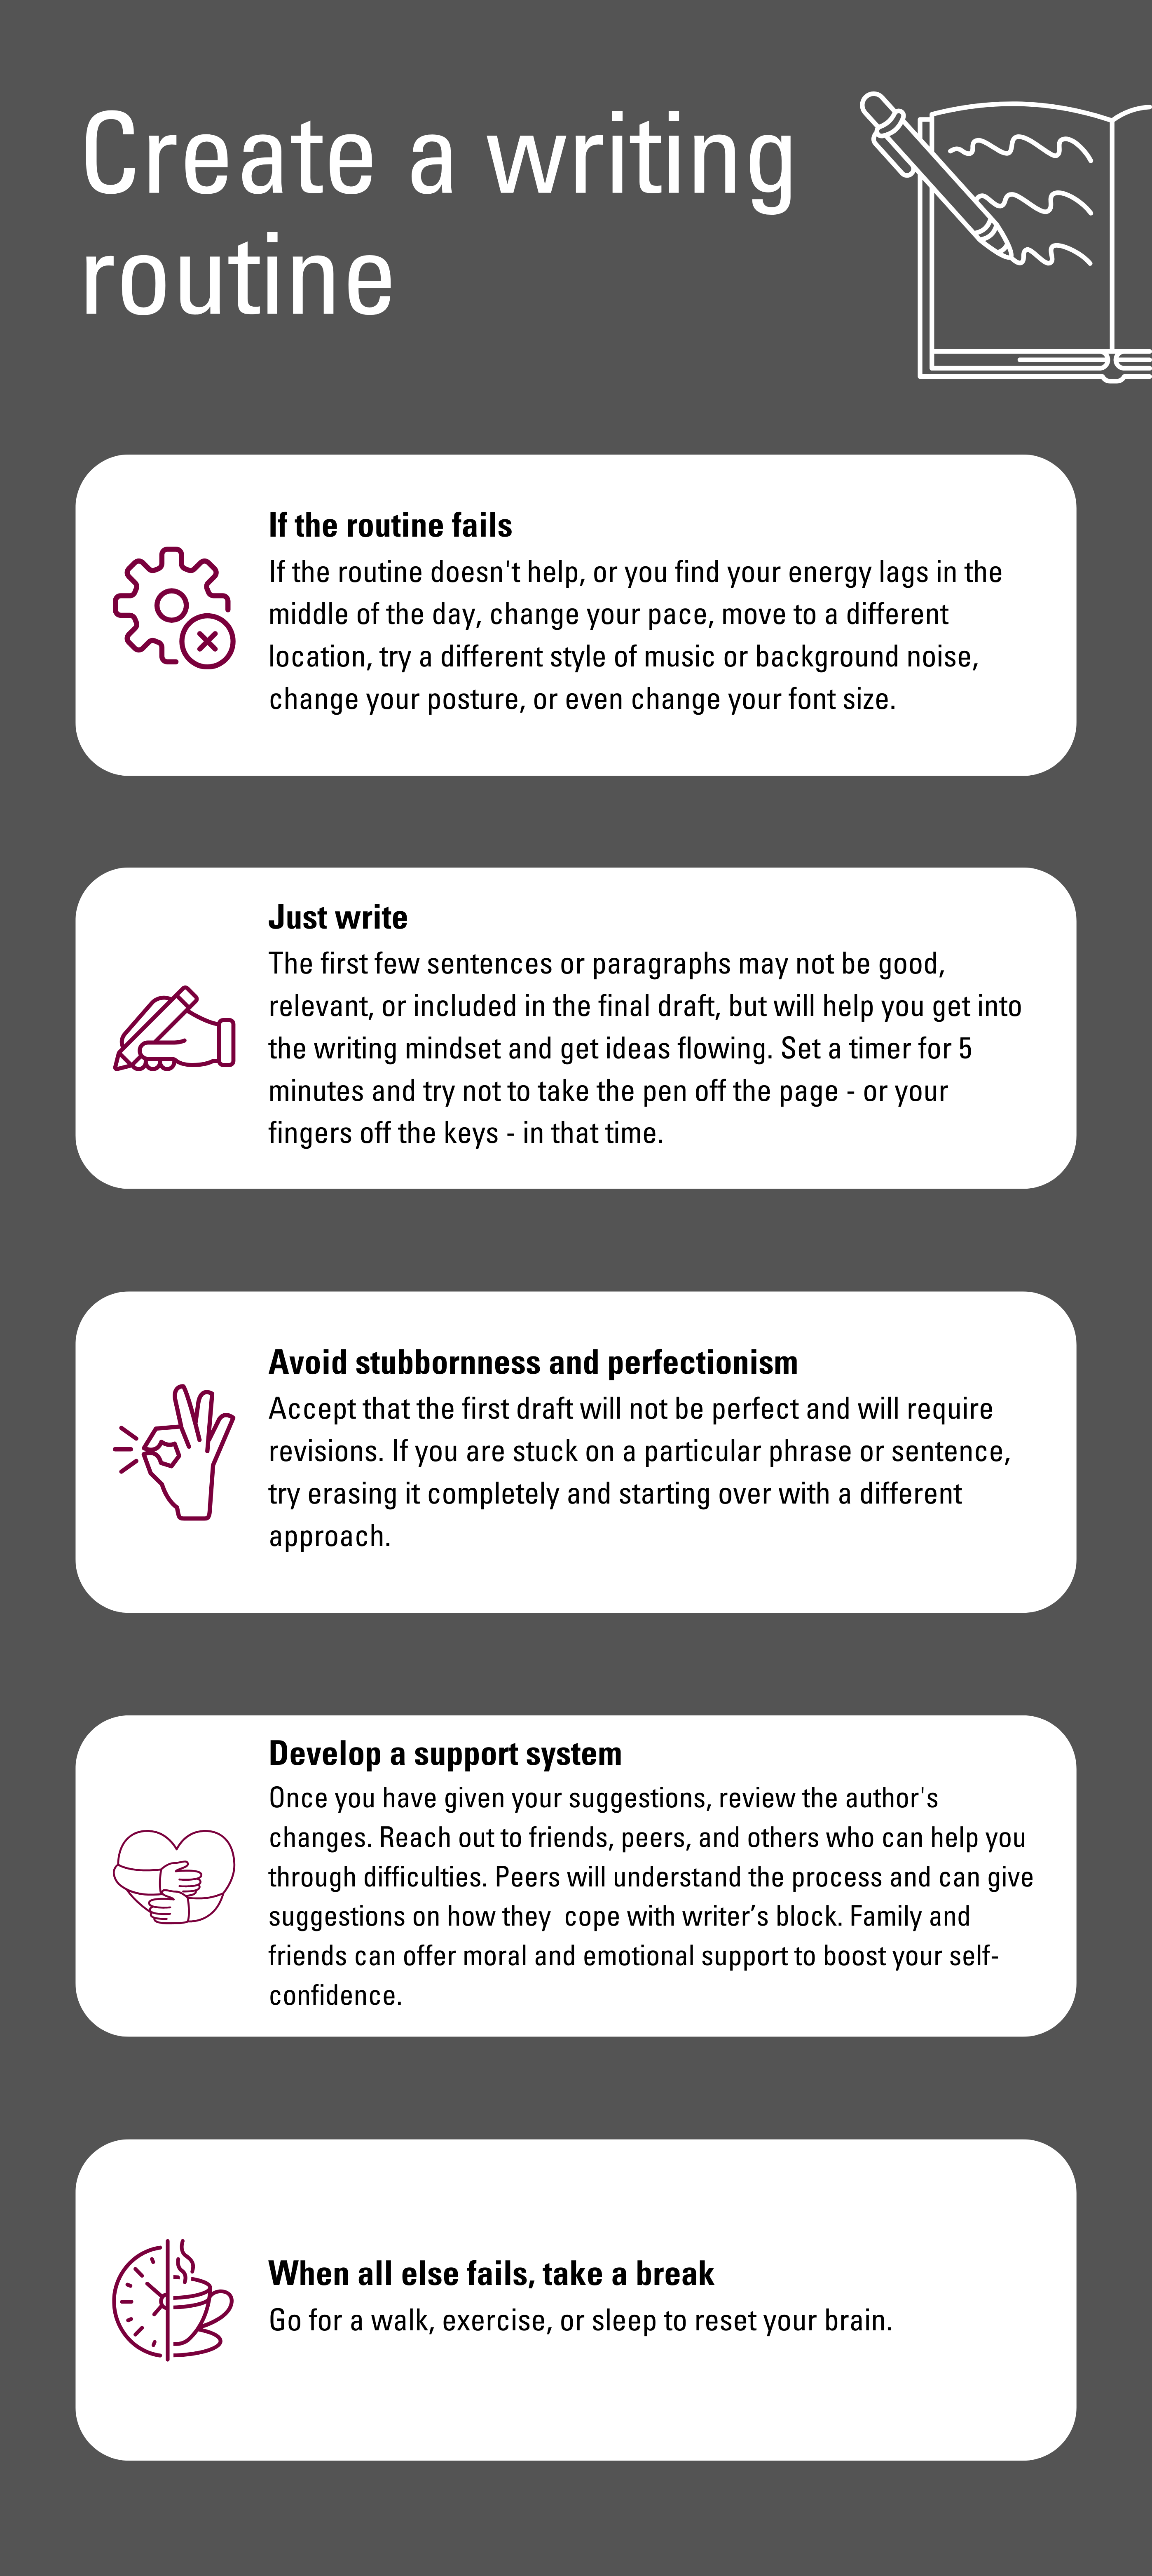 Poster highlighting five suggestions for fighting writer’s block with text description below.